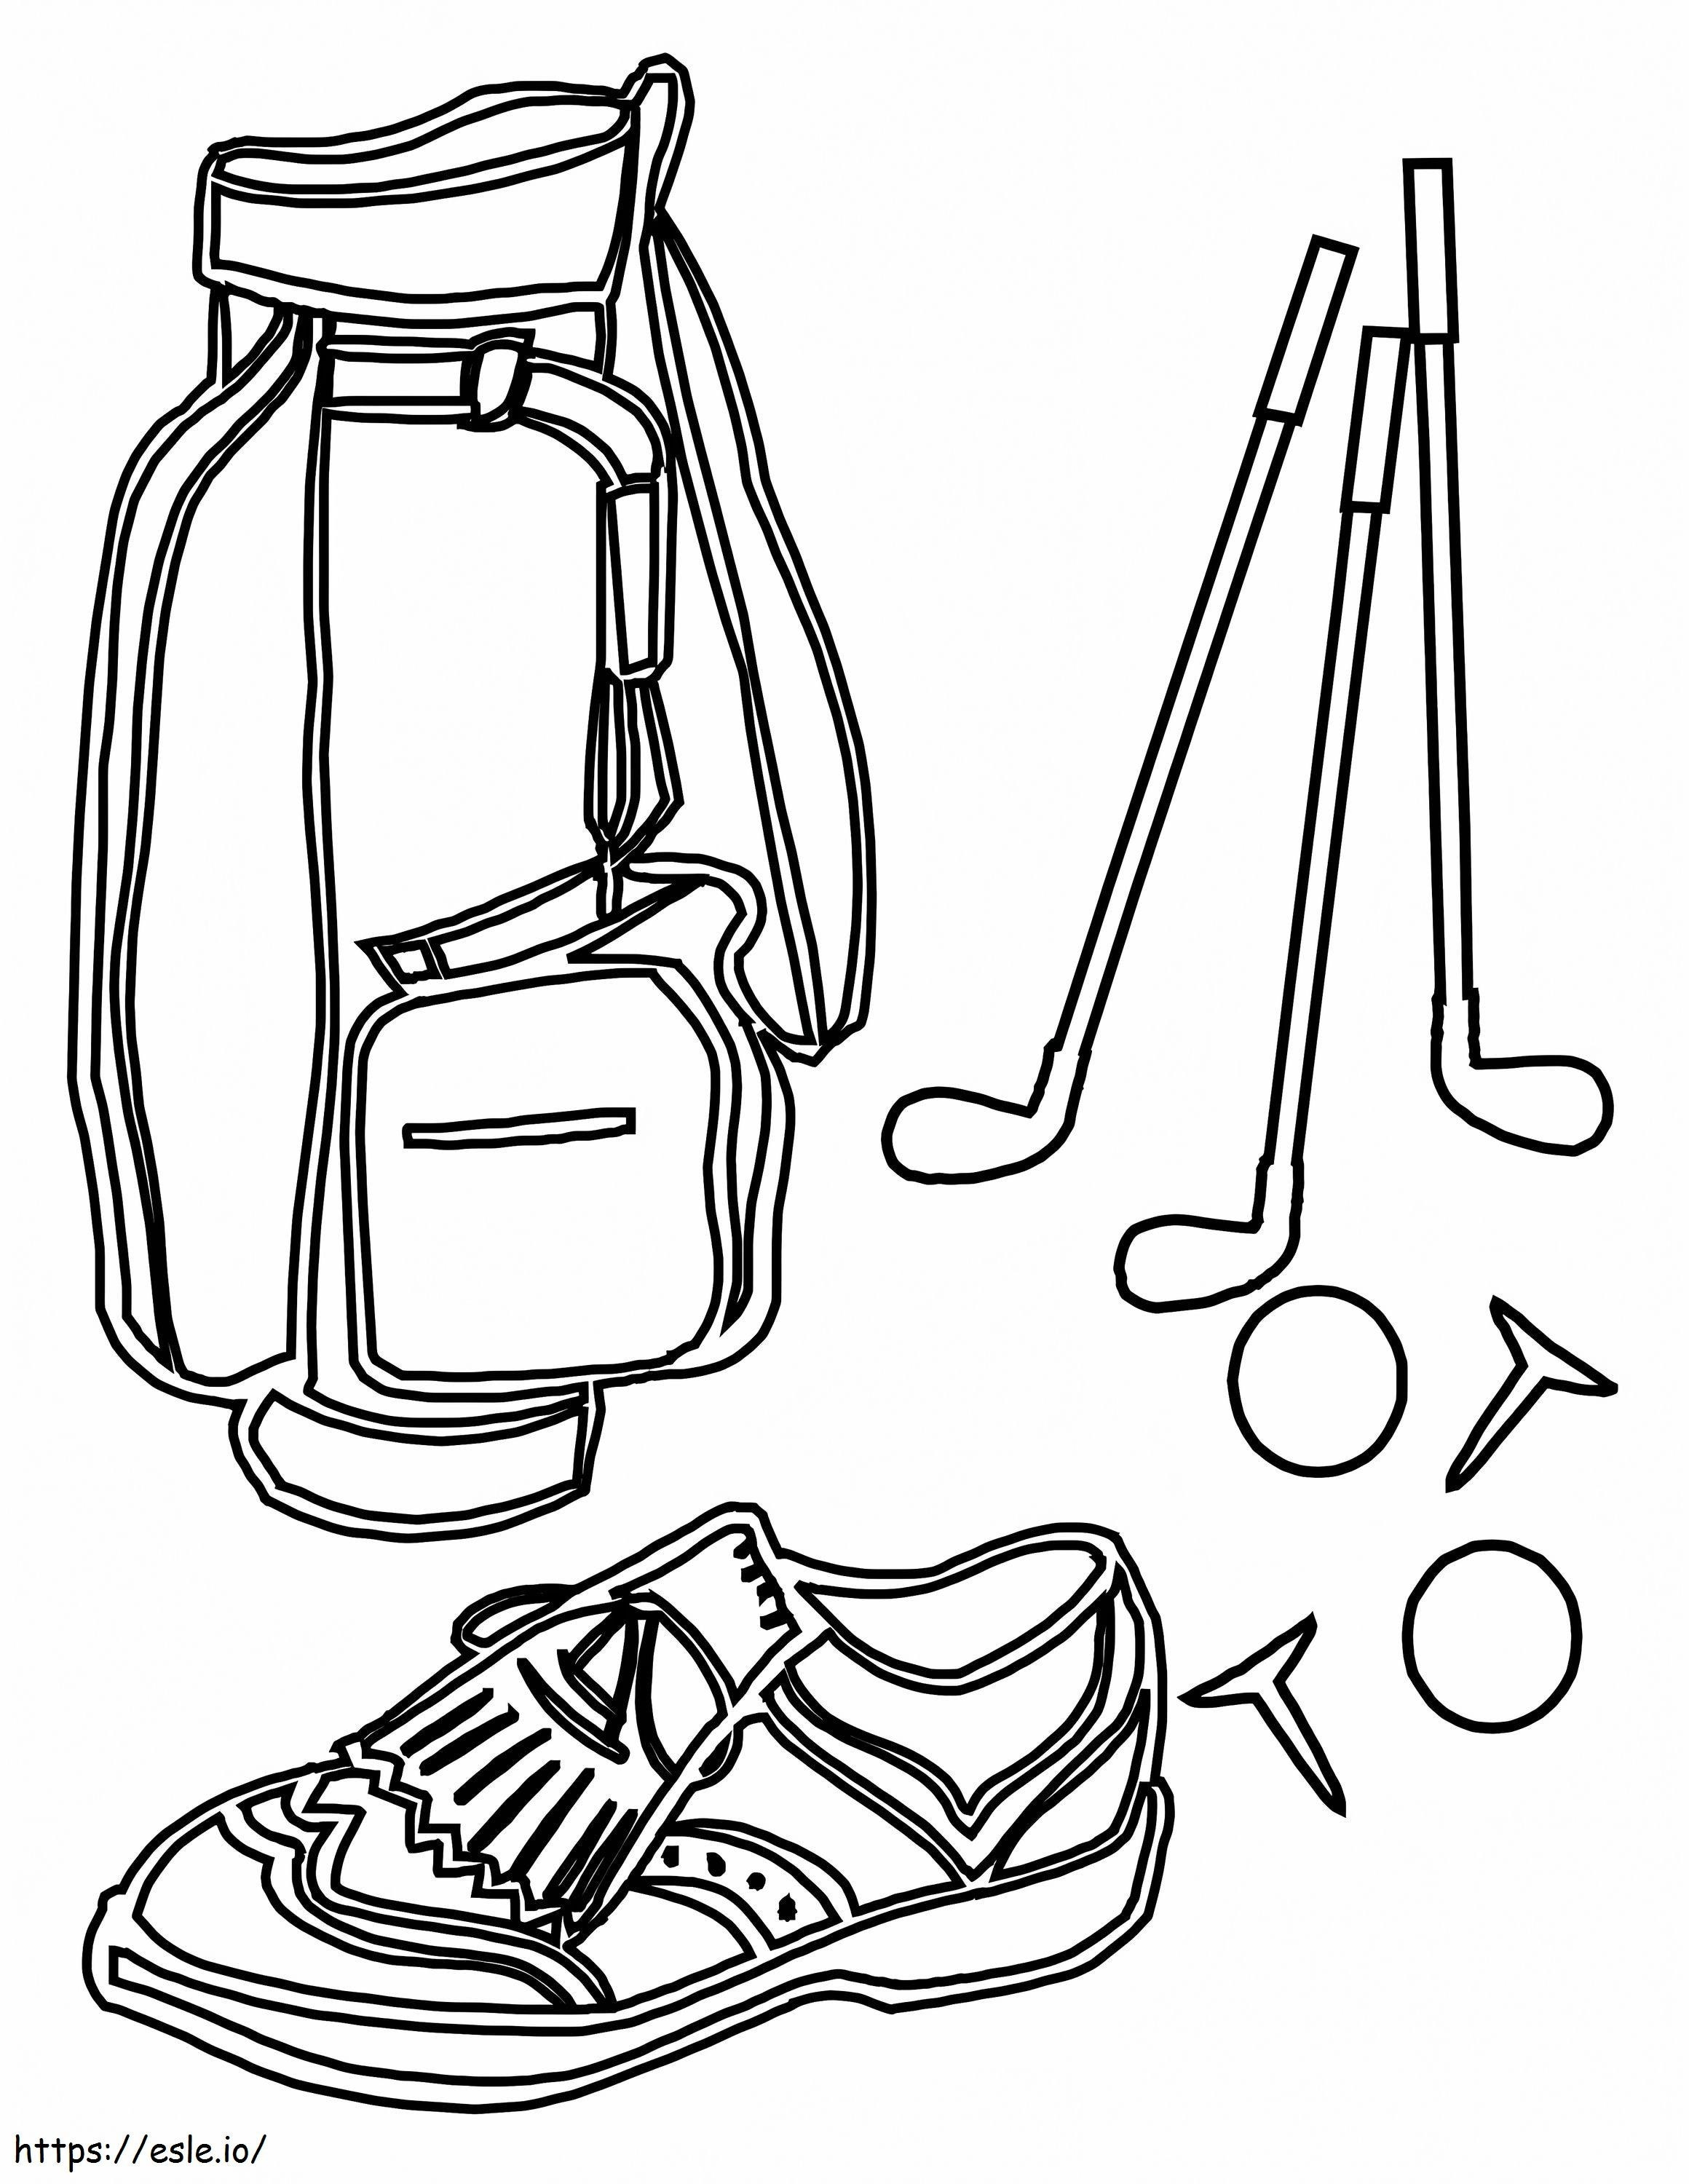 1556239633 Golf Diyouth Me In coloring page